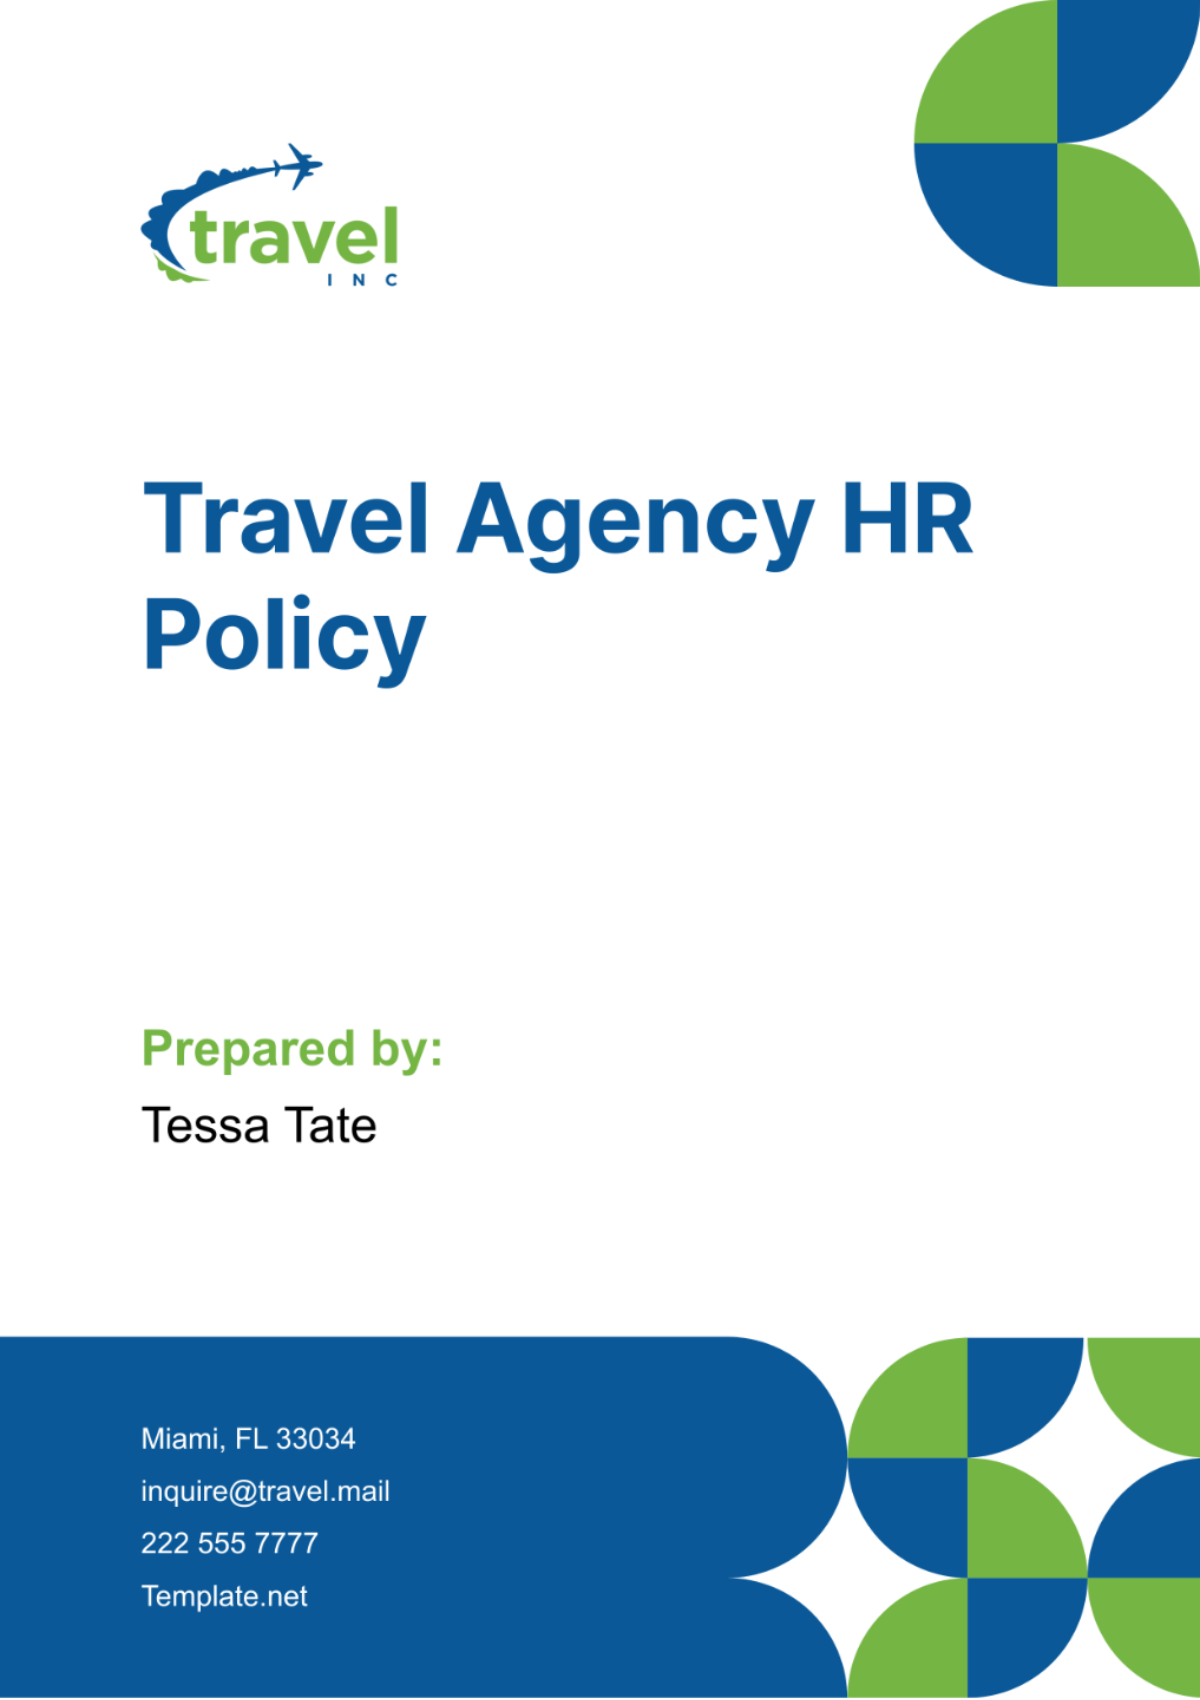 Travel Agency HR Policy Template